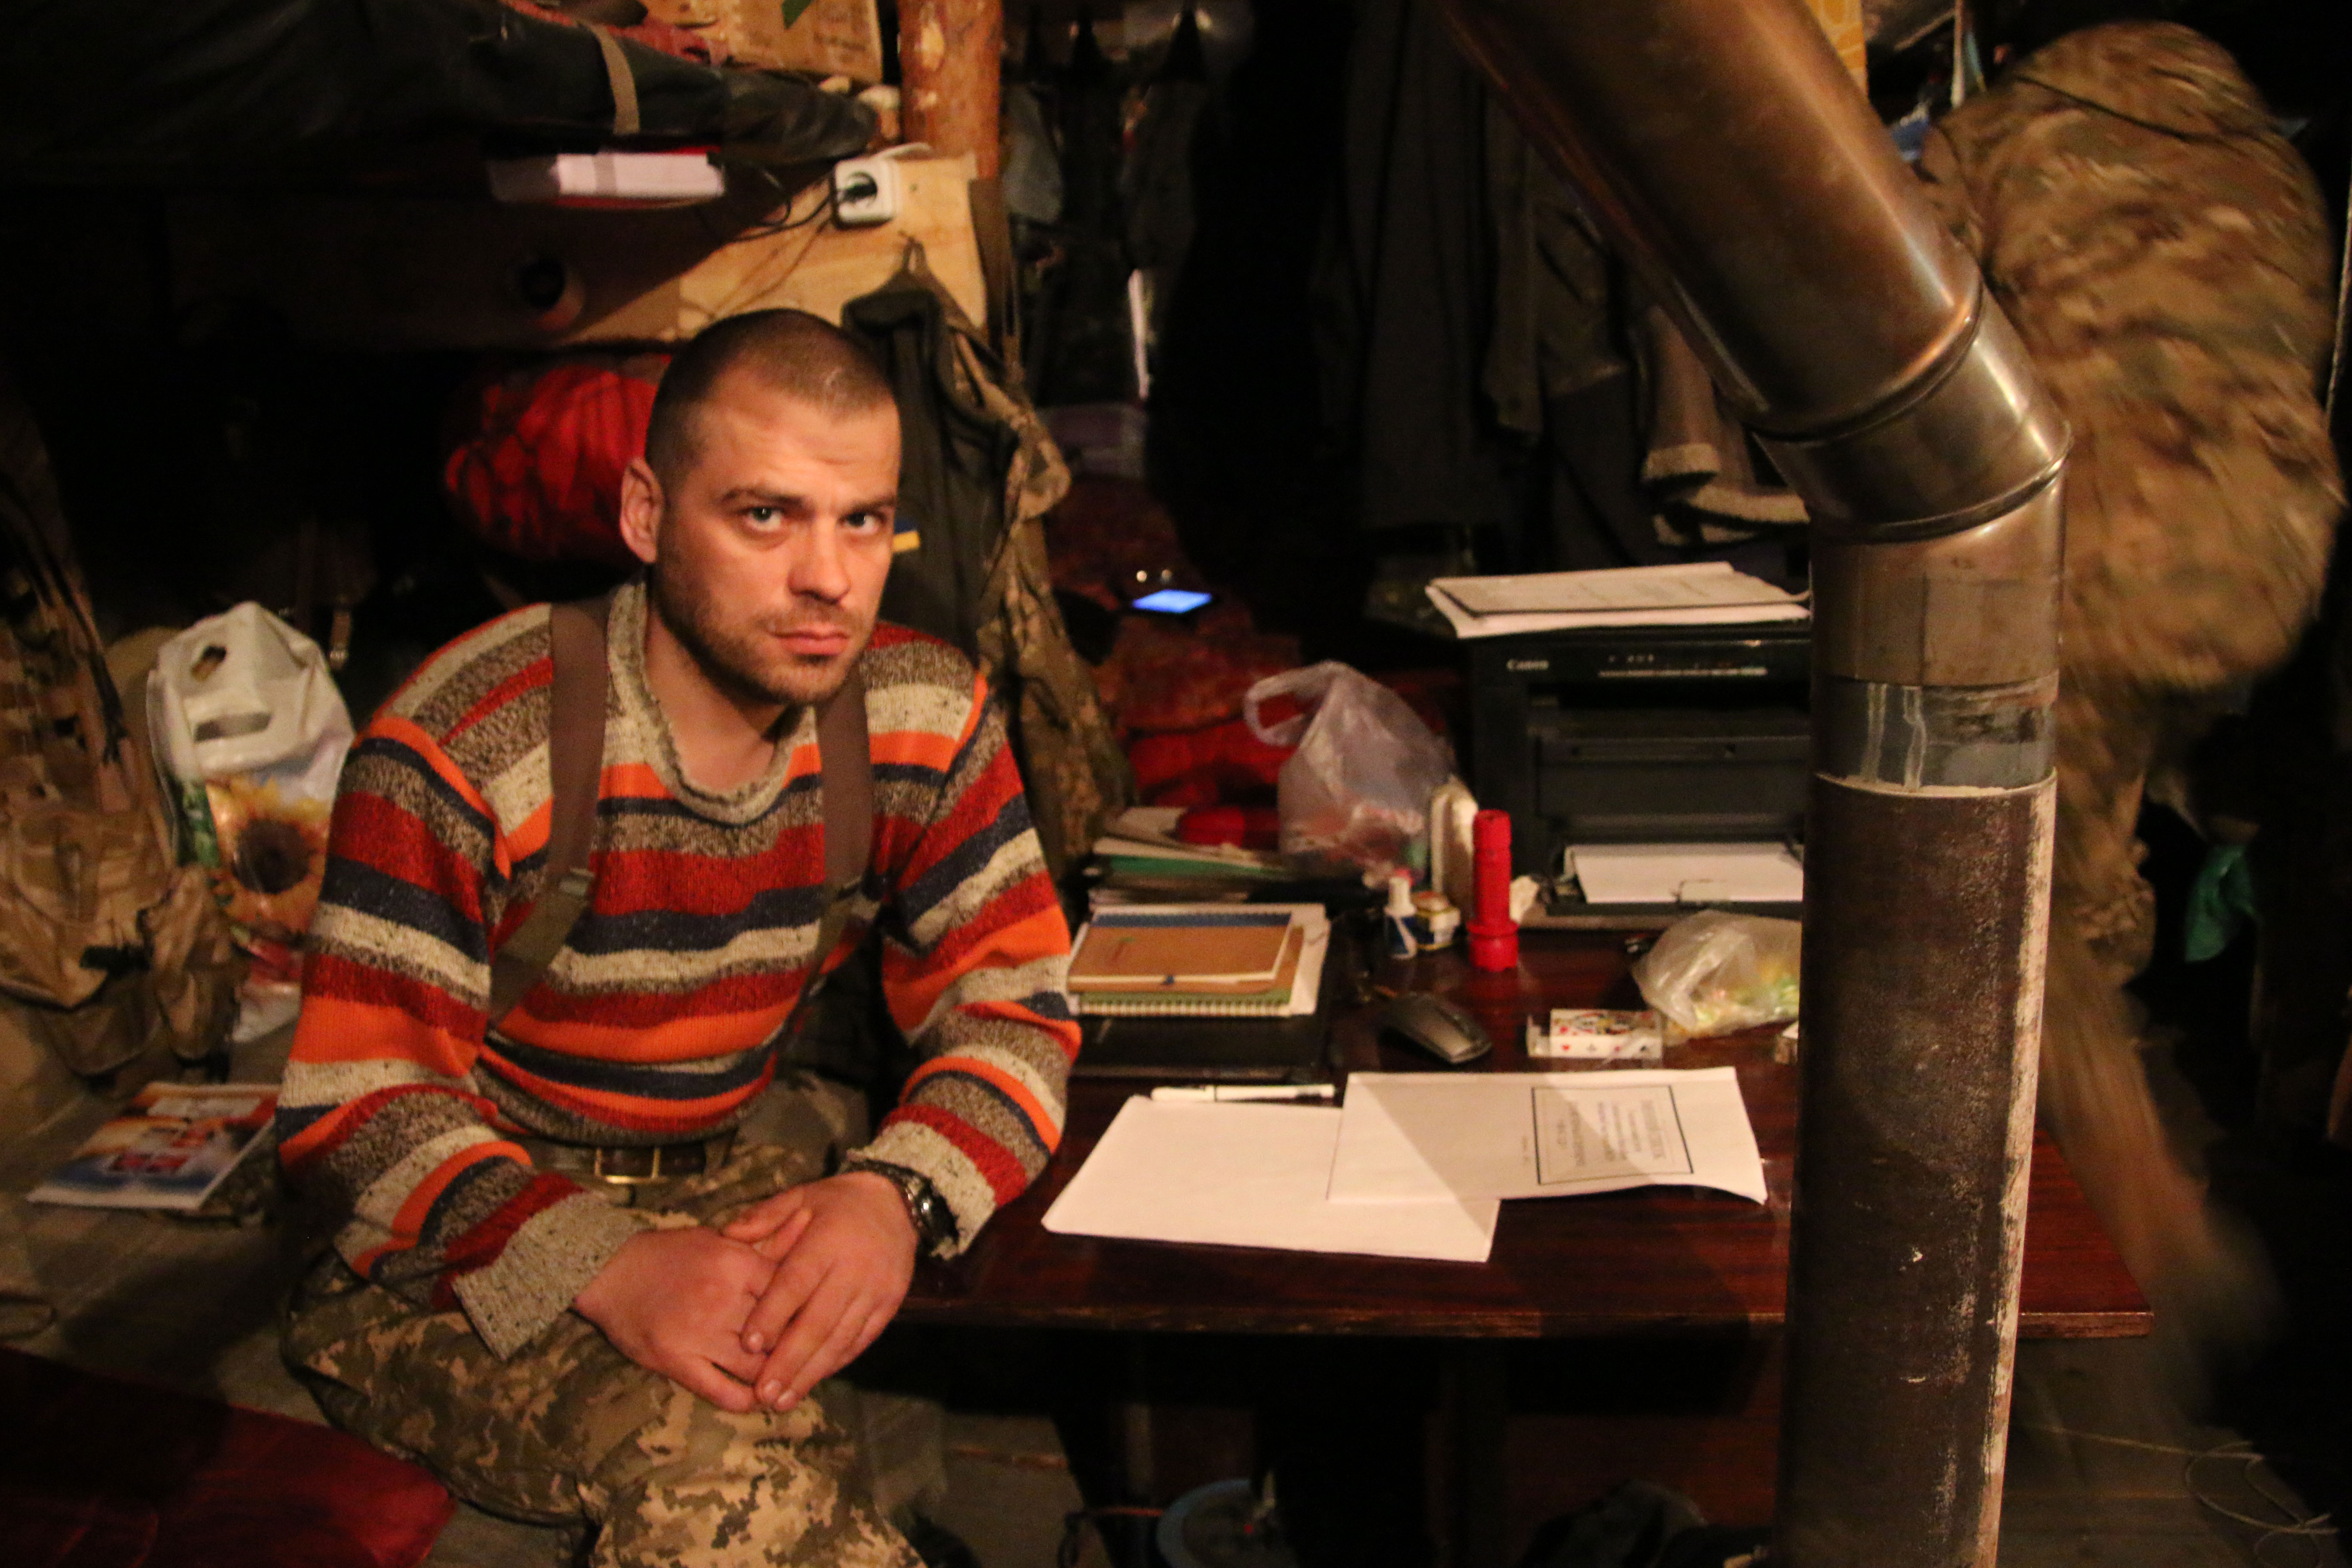 Ukraine’s soldiers live a Spartan life on the front lines in the Donbas.